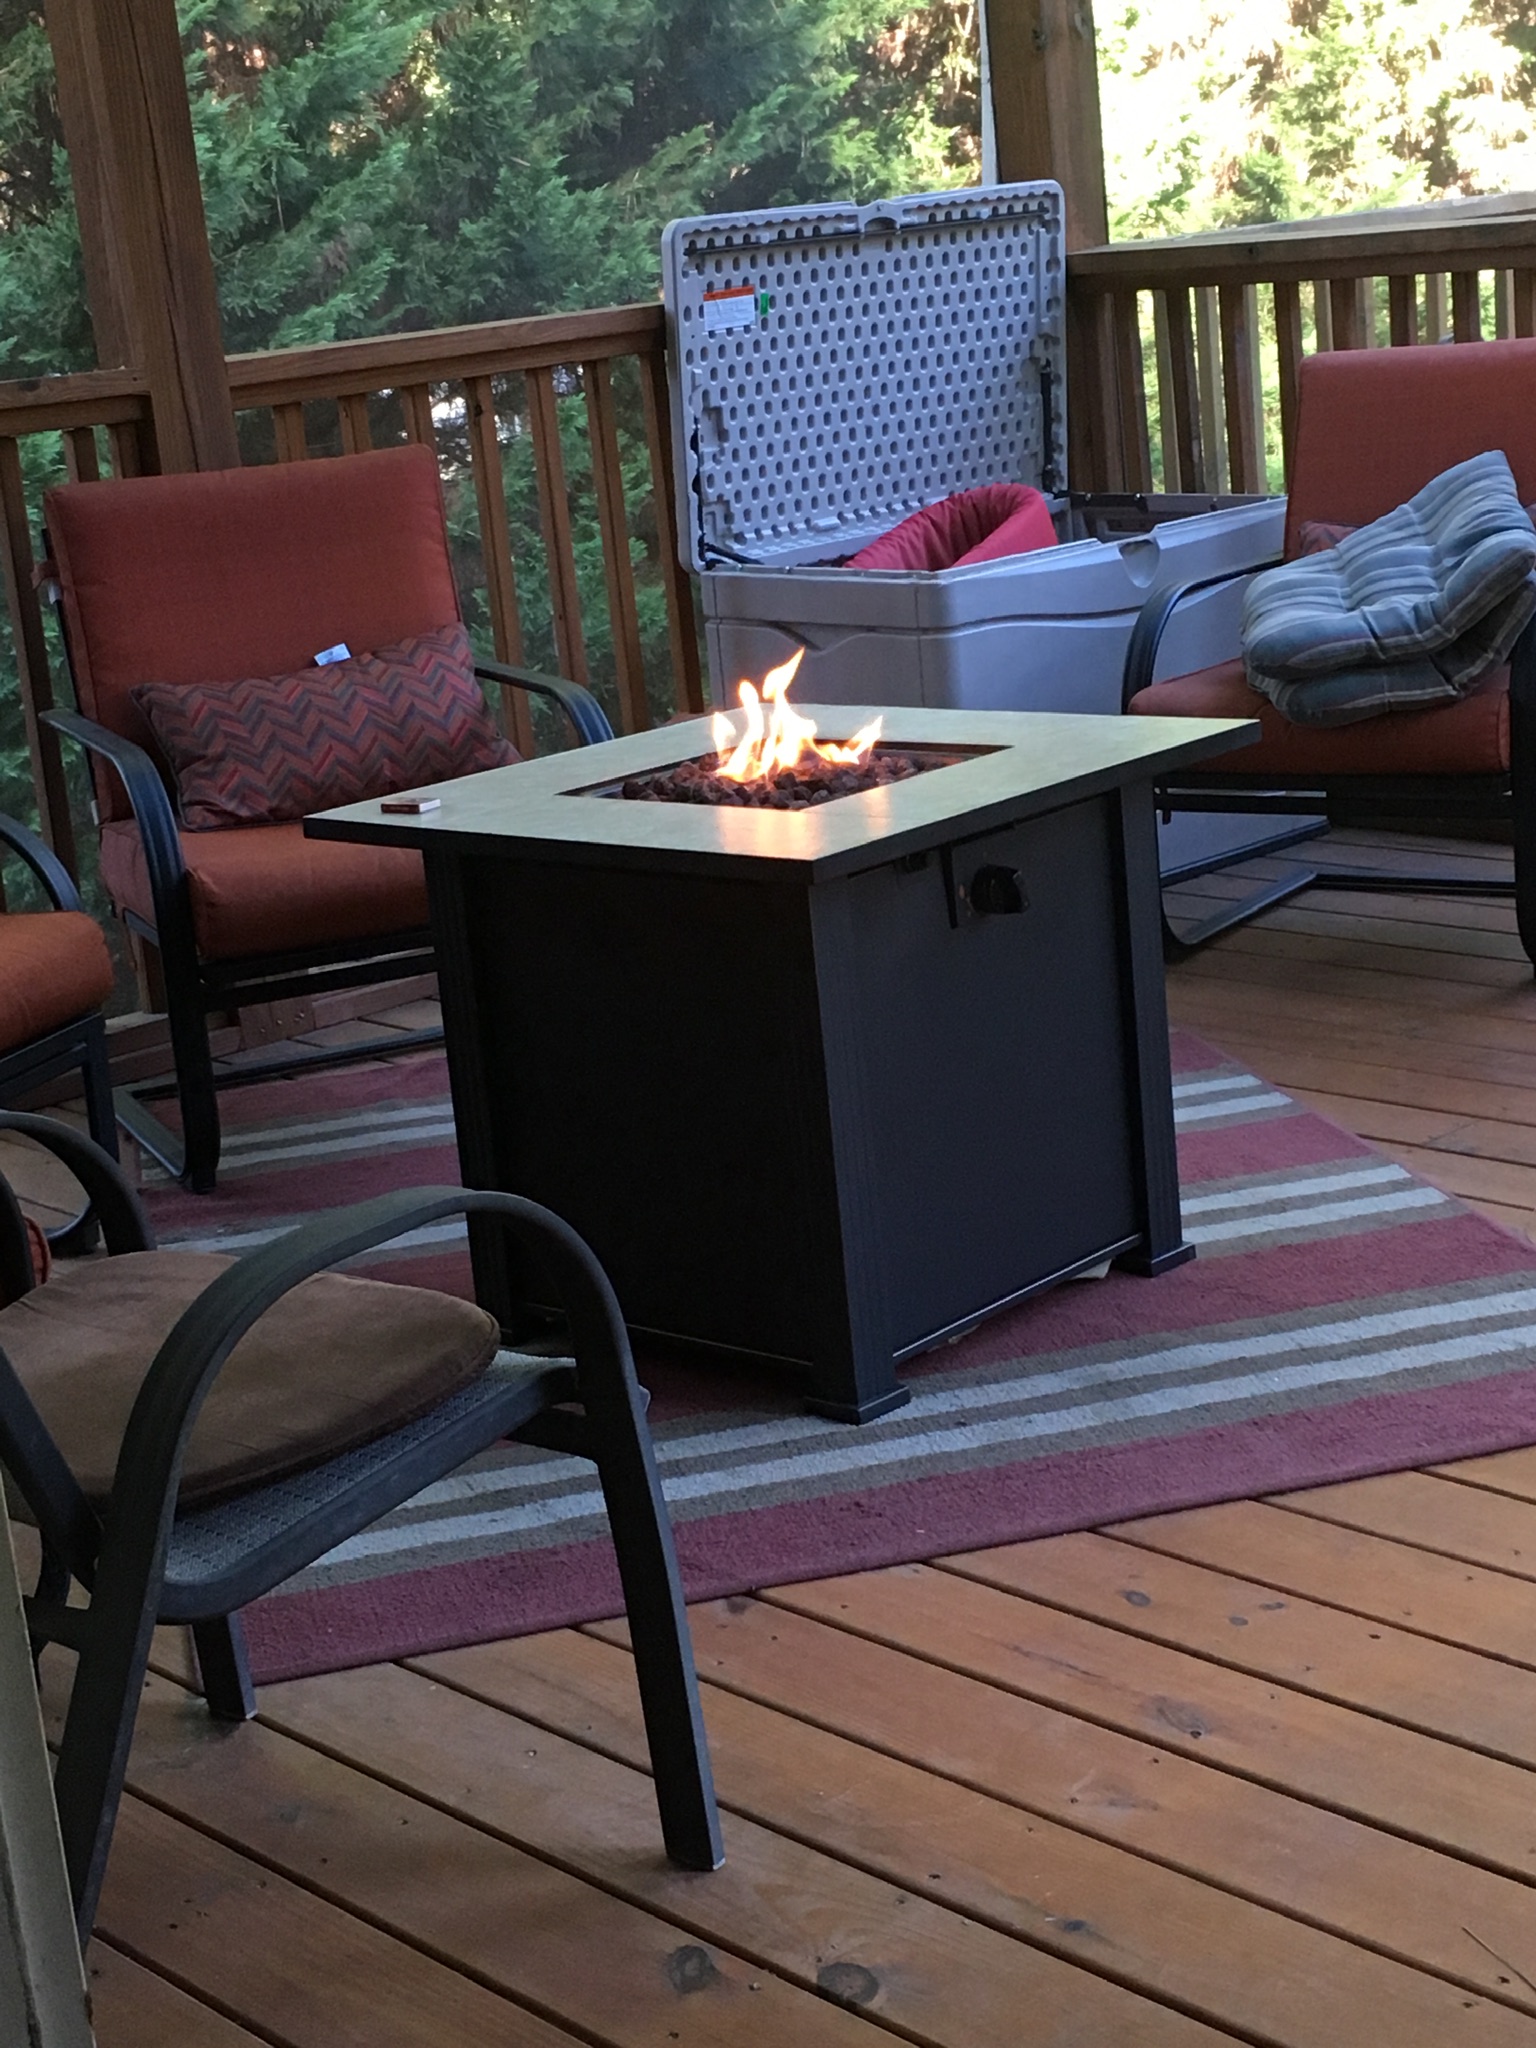 Propane Fire Pit In Screened Porch Fireplaces Townhome Heat Ceiling House Remodeling Decorating Construction Energy Use Kitchen Bathroom Bedroom Building Rooms City Data Forum